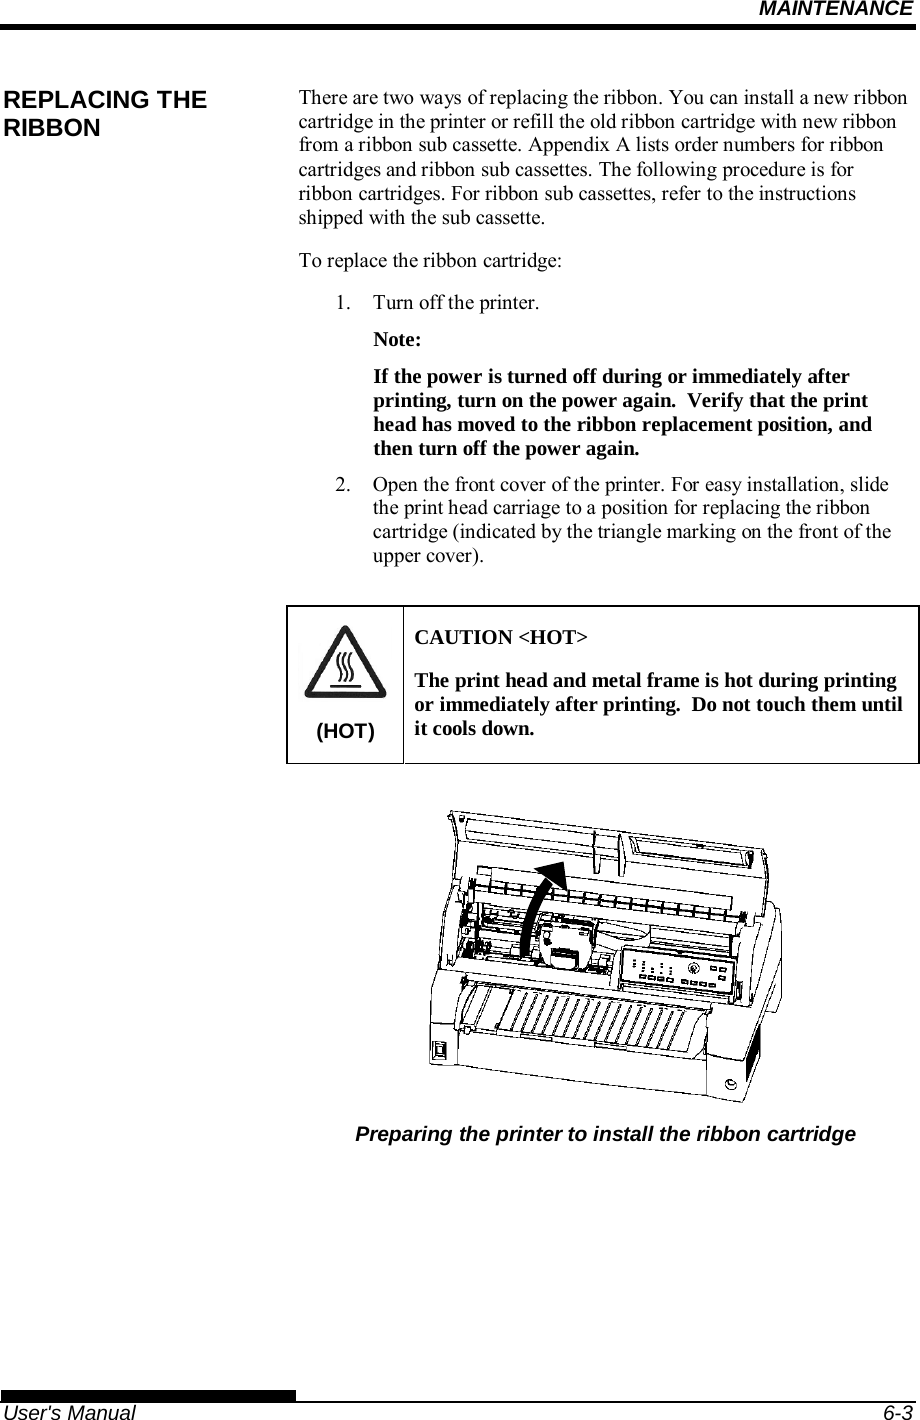 MAINTENANCE   User&apos;s Manual  6-3 There are two ways of replacing the ribbon. You can install a new ribbon cartridge in the printer or refill the old ribbon cartridge with new ribbon from a ribbon sub cassette. Appendix A lists order numbers for ribbon cartridges and ribbon sub cassettes. The following procedure is for ribbon cartridges. For ribbon sub cassettes, refer to the instructions shipped with the sub cassette. To replace the ribbon cartridge: 1.  Turn off the printer. Note: If the power is turned off during or immediately after printing, turn on the power again.  Verify that the print head has moved to the ribbon replacement position, and then turn off the power again. 2.  Open the front cover of the printer. For easy installation, slide the print head carriage to a position for replacing the ribbon cartridge (indicated by the triangle marking on the front of the upper cover).  (HOT) CAUTION &lt;HOT&gt; The print head and metal frame is hot during printing or immediately after printing.  Do not touch them until it cools down.   Preparing the printer to install the ribbon cartridge REPLACING THE RIBBON 